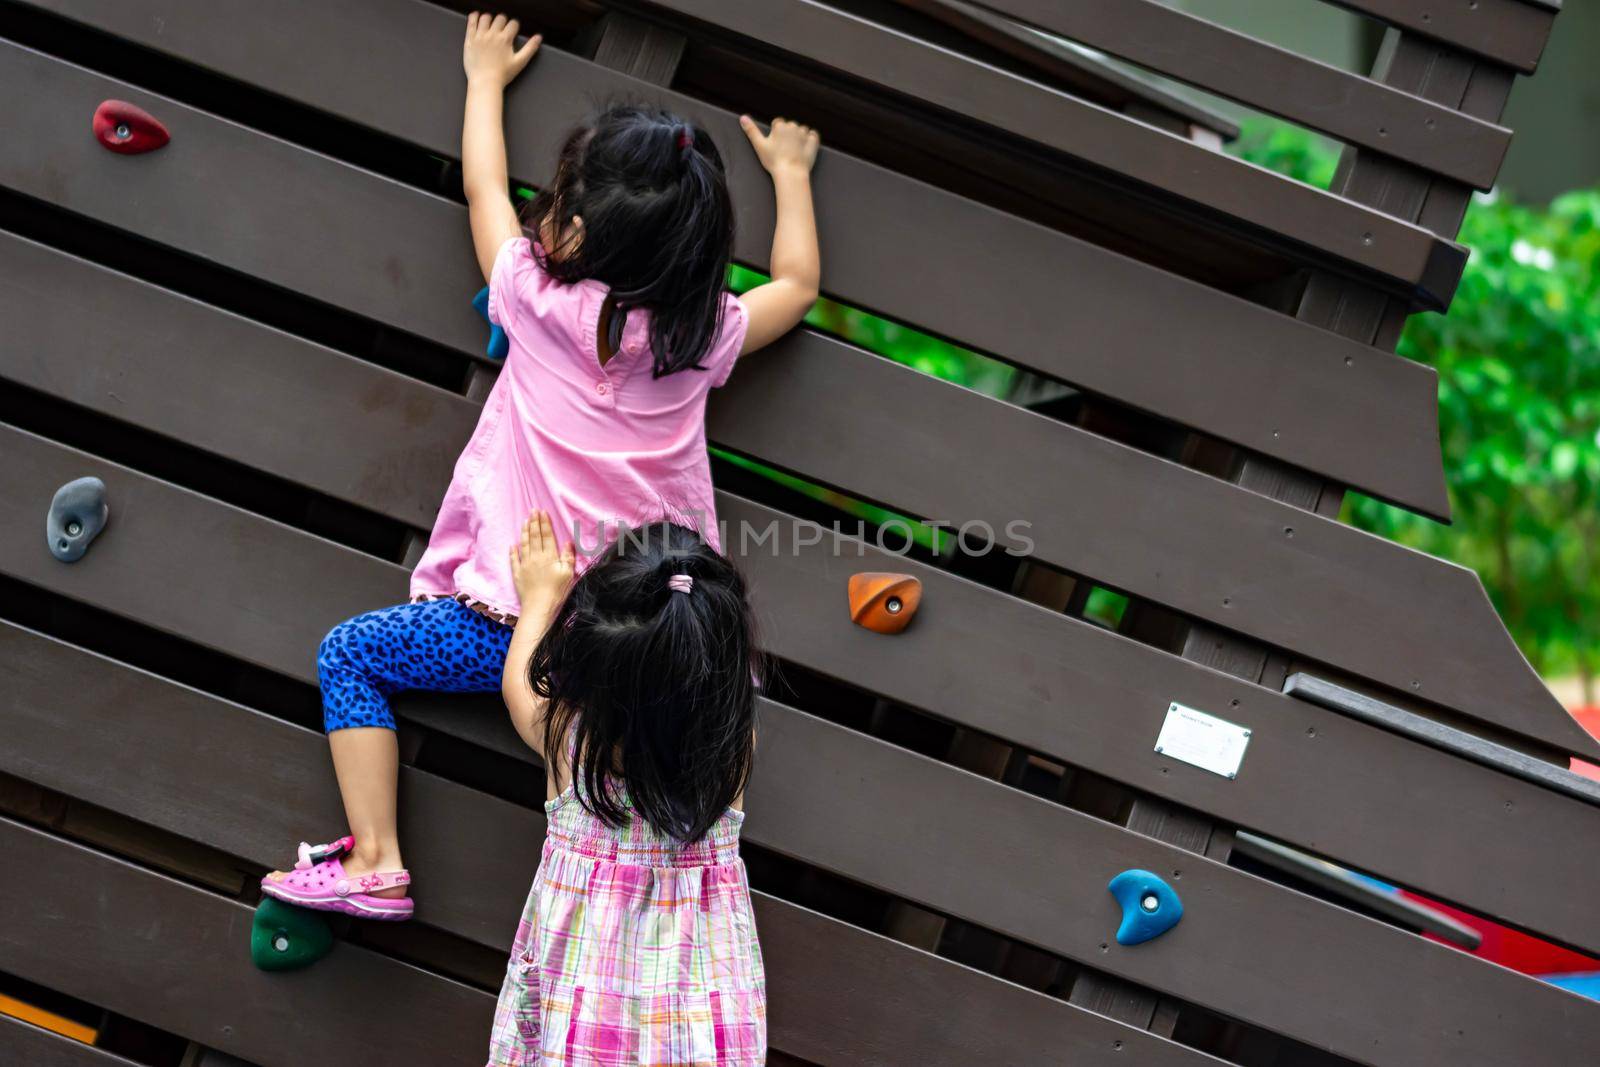 Pretty asian little twins girls while climbing in a playground and helping each other